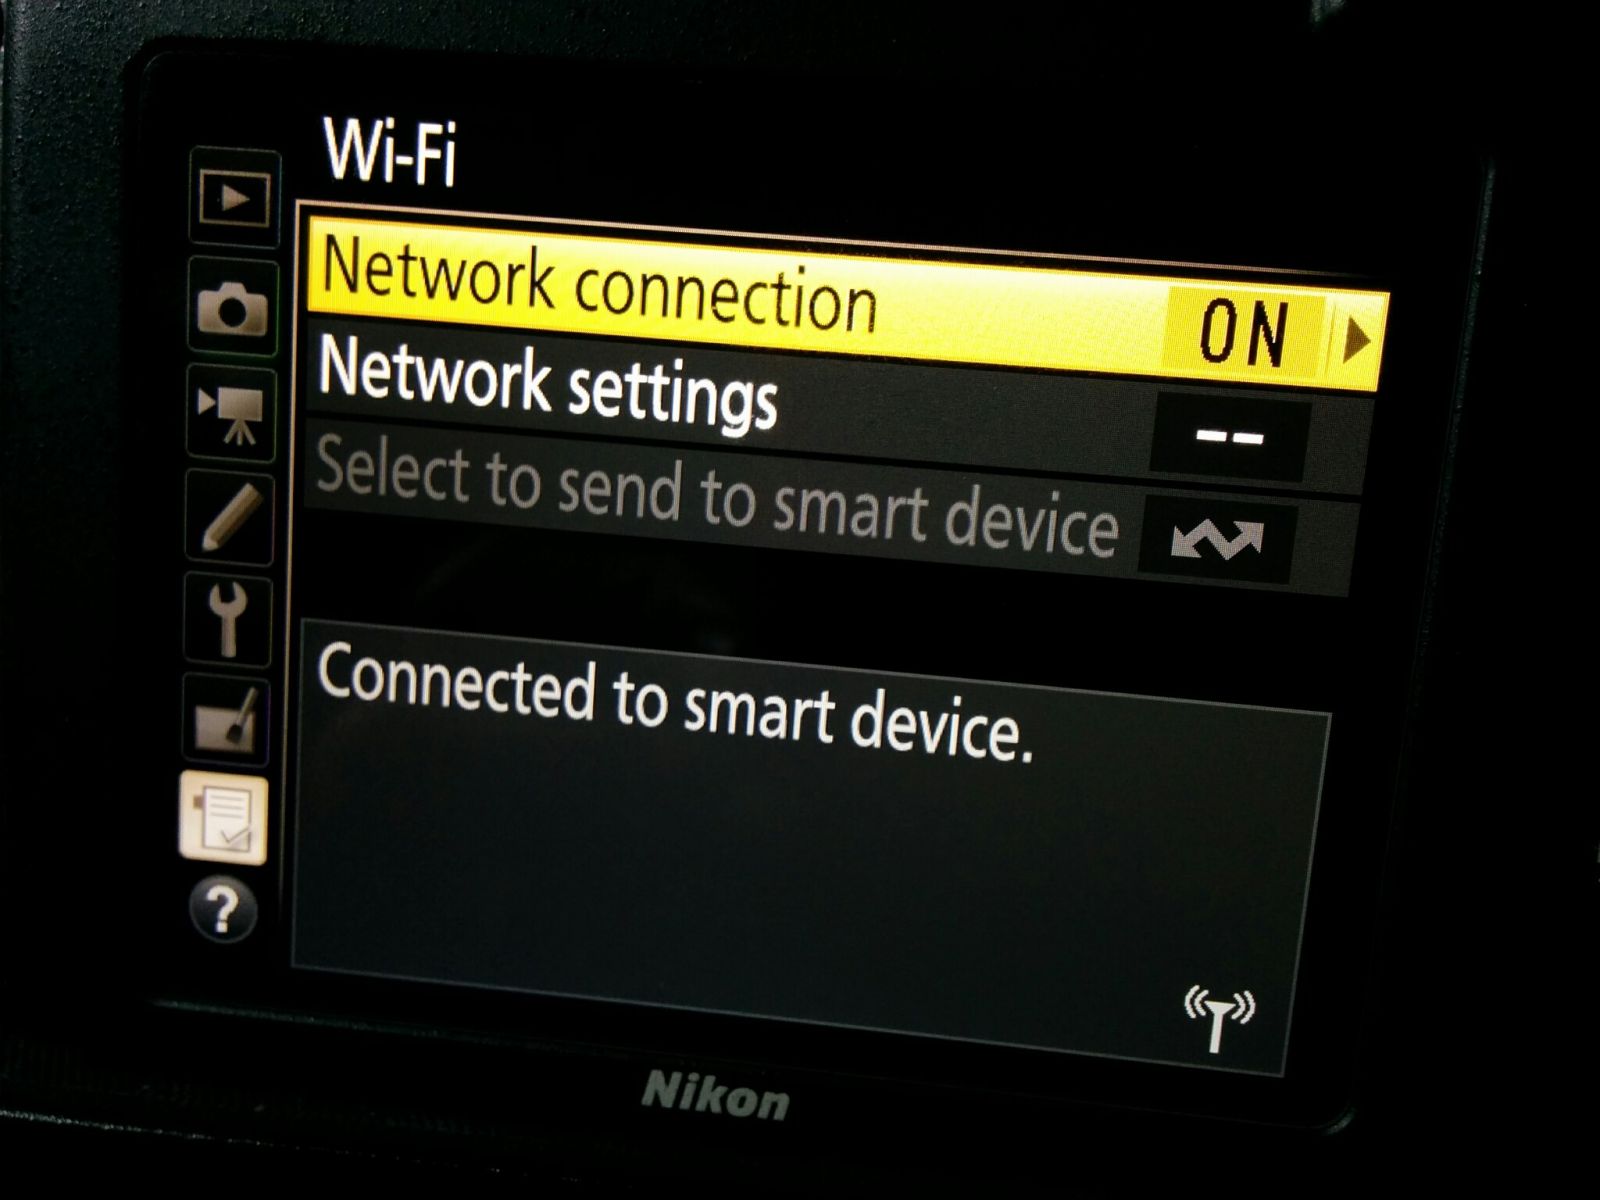 qdslrdashboard-nikon-remote-control-app-android-connected-to-smart-device